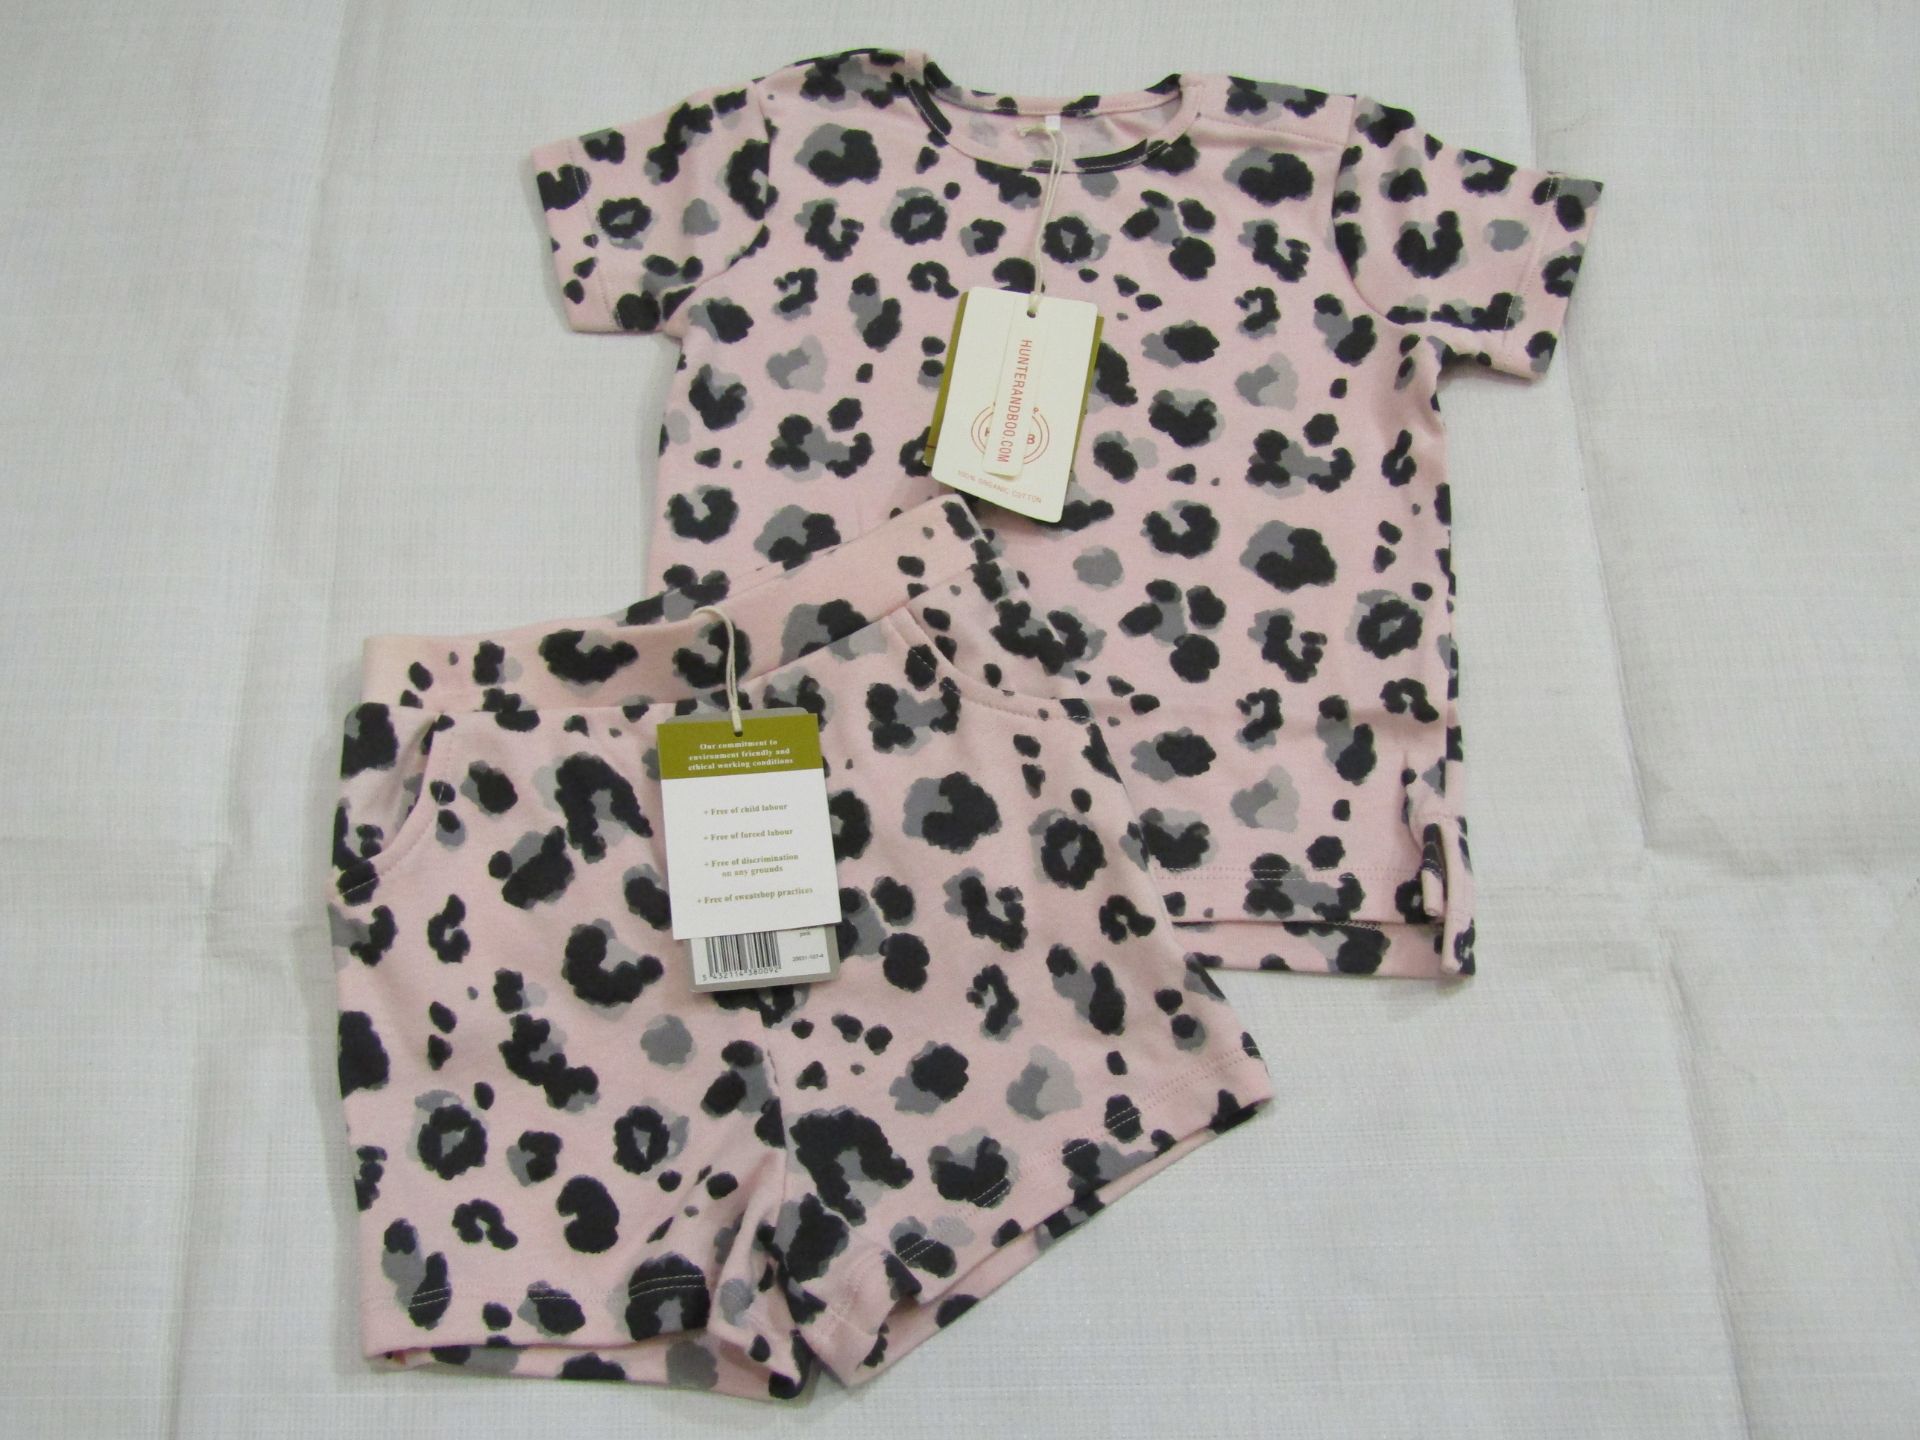 Hunter & Boo Yala Pink T/Shirt & Shorts Aged 12-24 Months New & Packaged RRP £13 Each